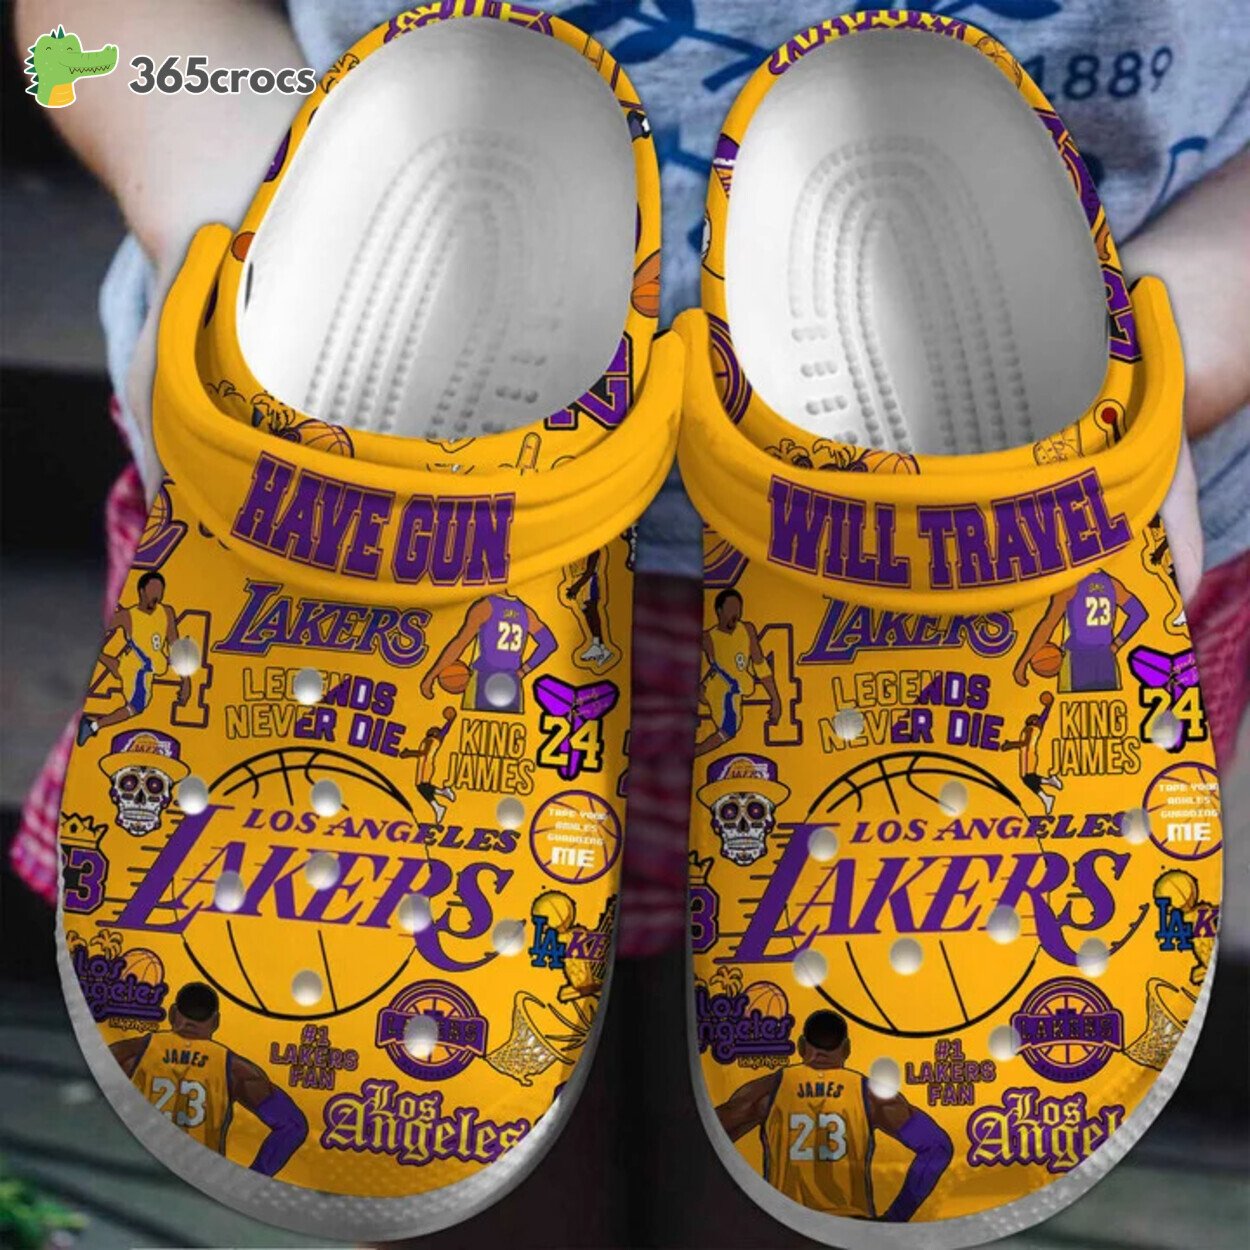 Los Angeles Lakers Basketball Club Team Comfortable Shoes Crocss Kids